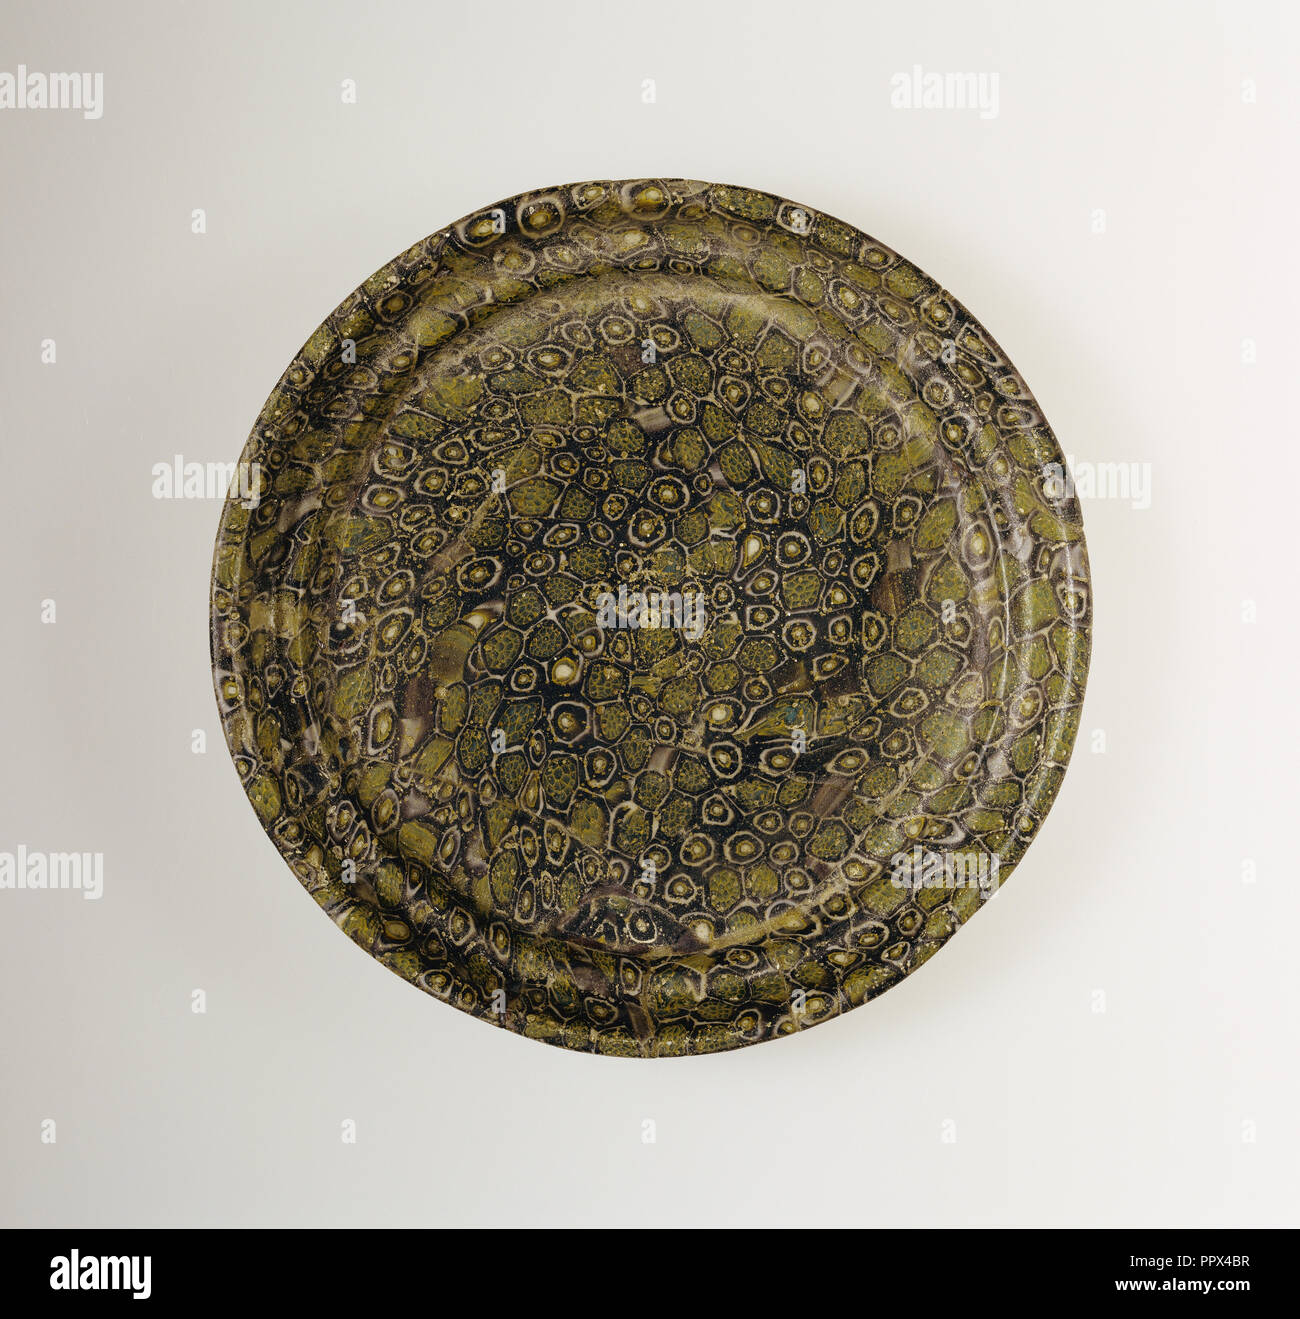 Dish with Flowers and Dots; Roman Empire; 1st century B.C. - 1st century A.D; Glass; 2.1 × 16 cm, 13,16 × 6 5,16 in Stock Photo